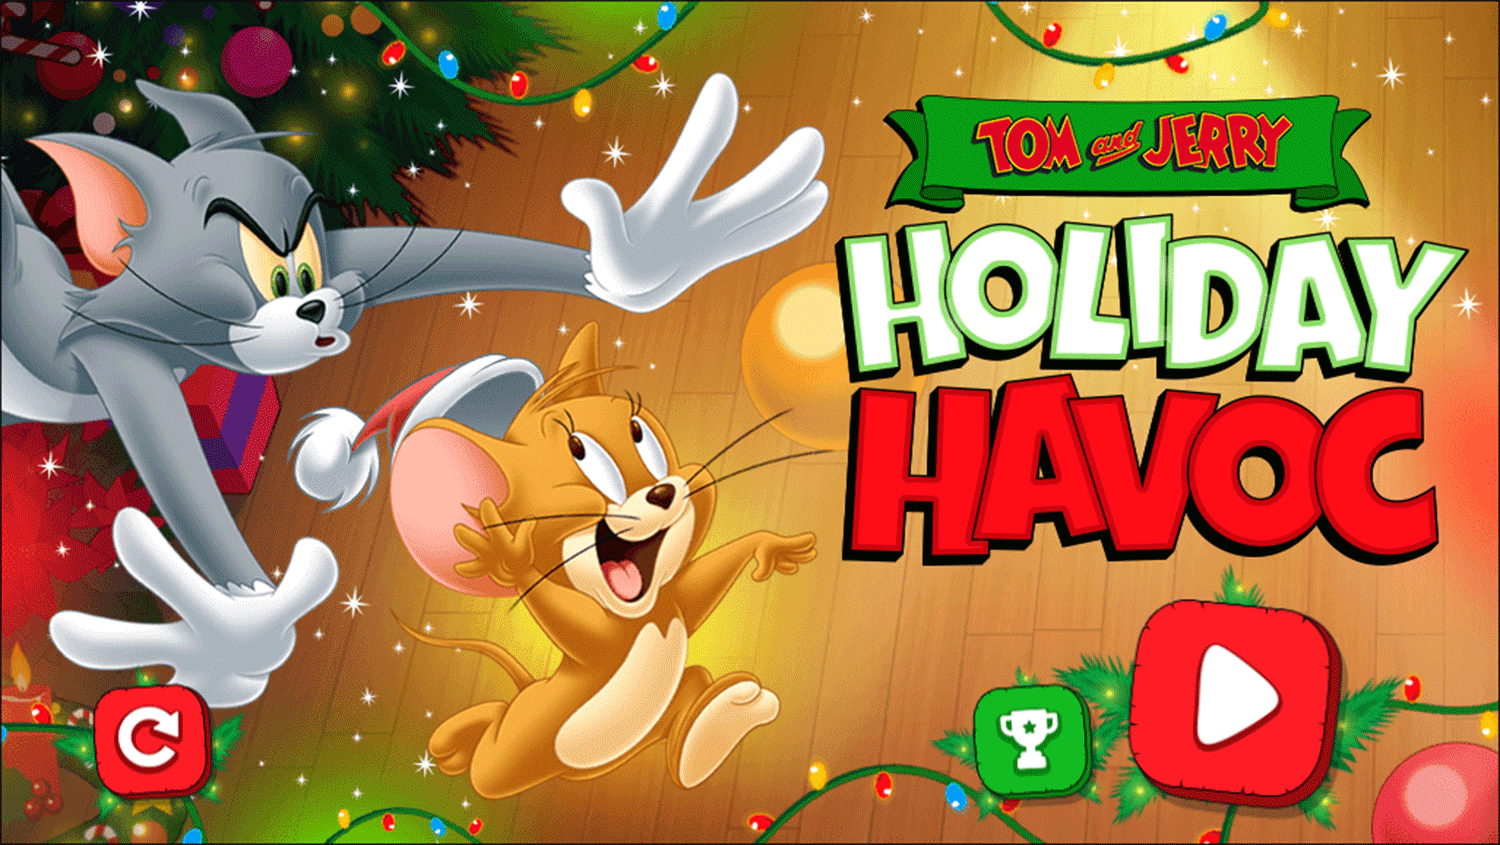 Tom and Jerry Holiday Havoc Welcome Screen Screenshots.